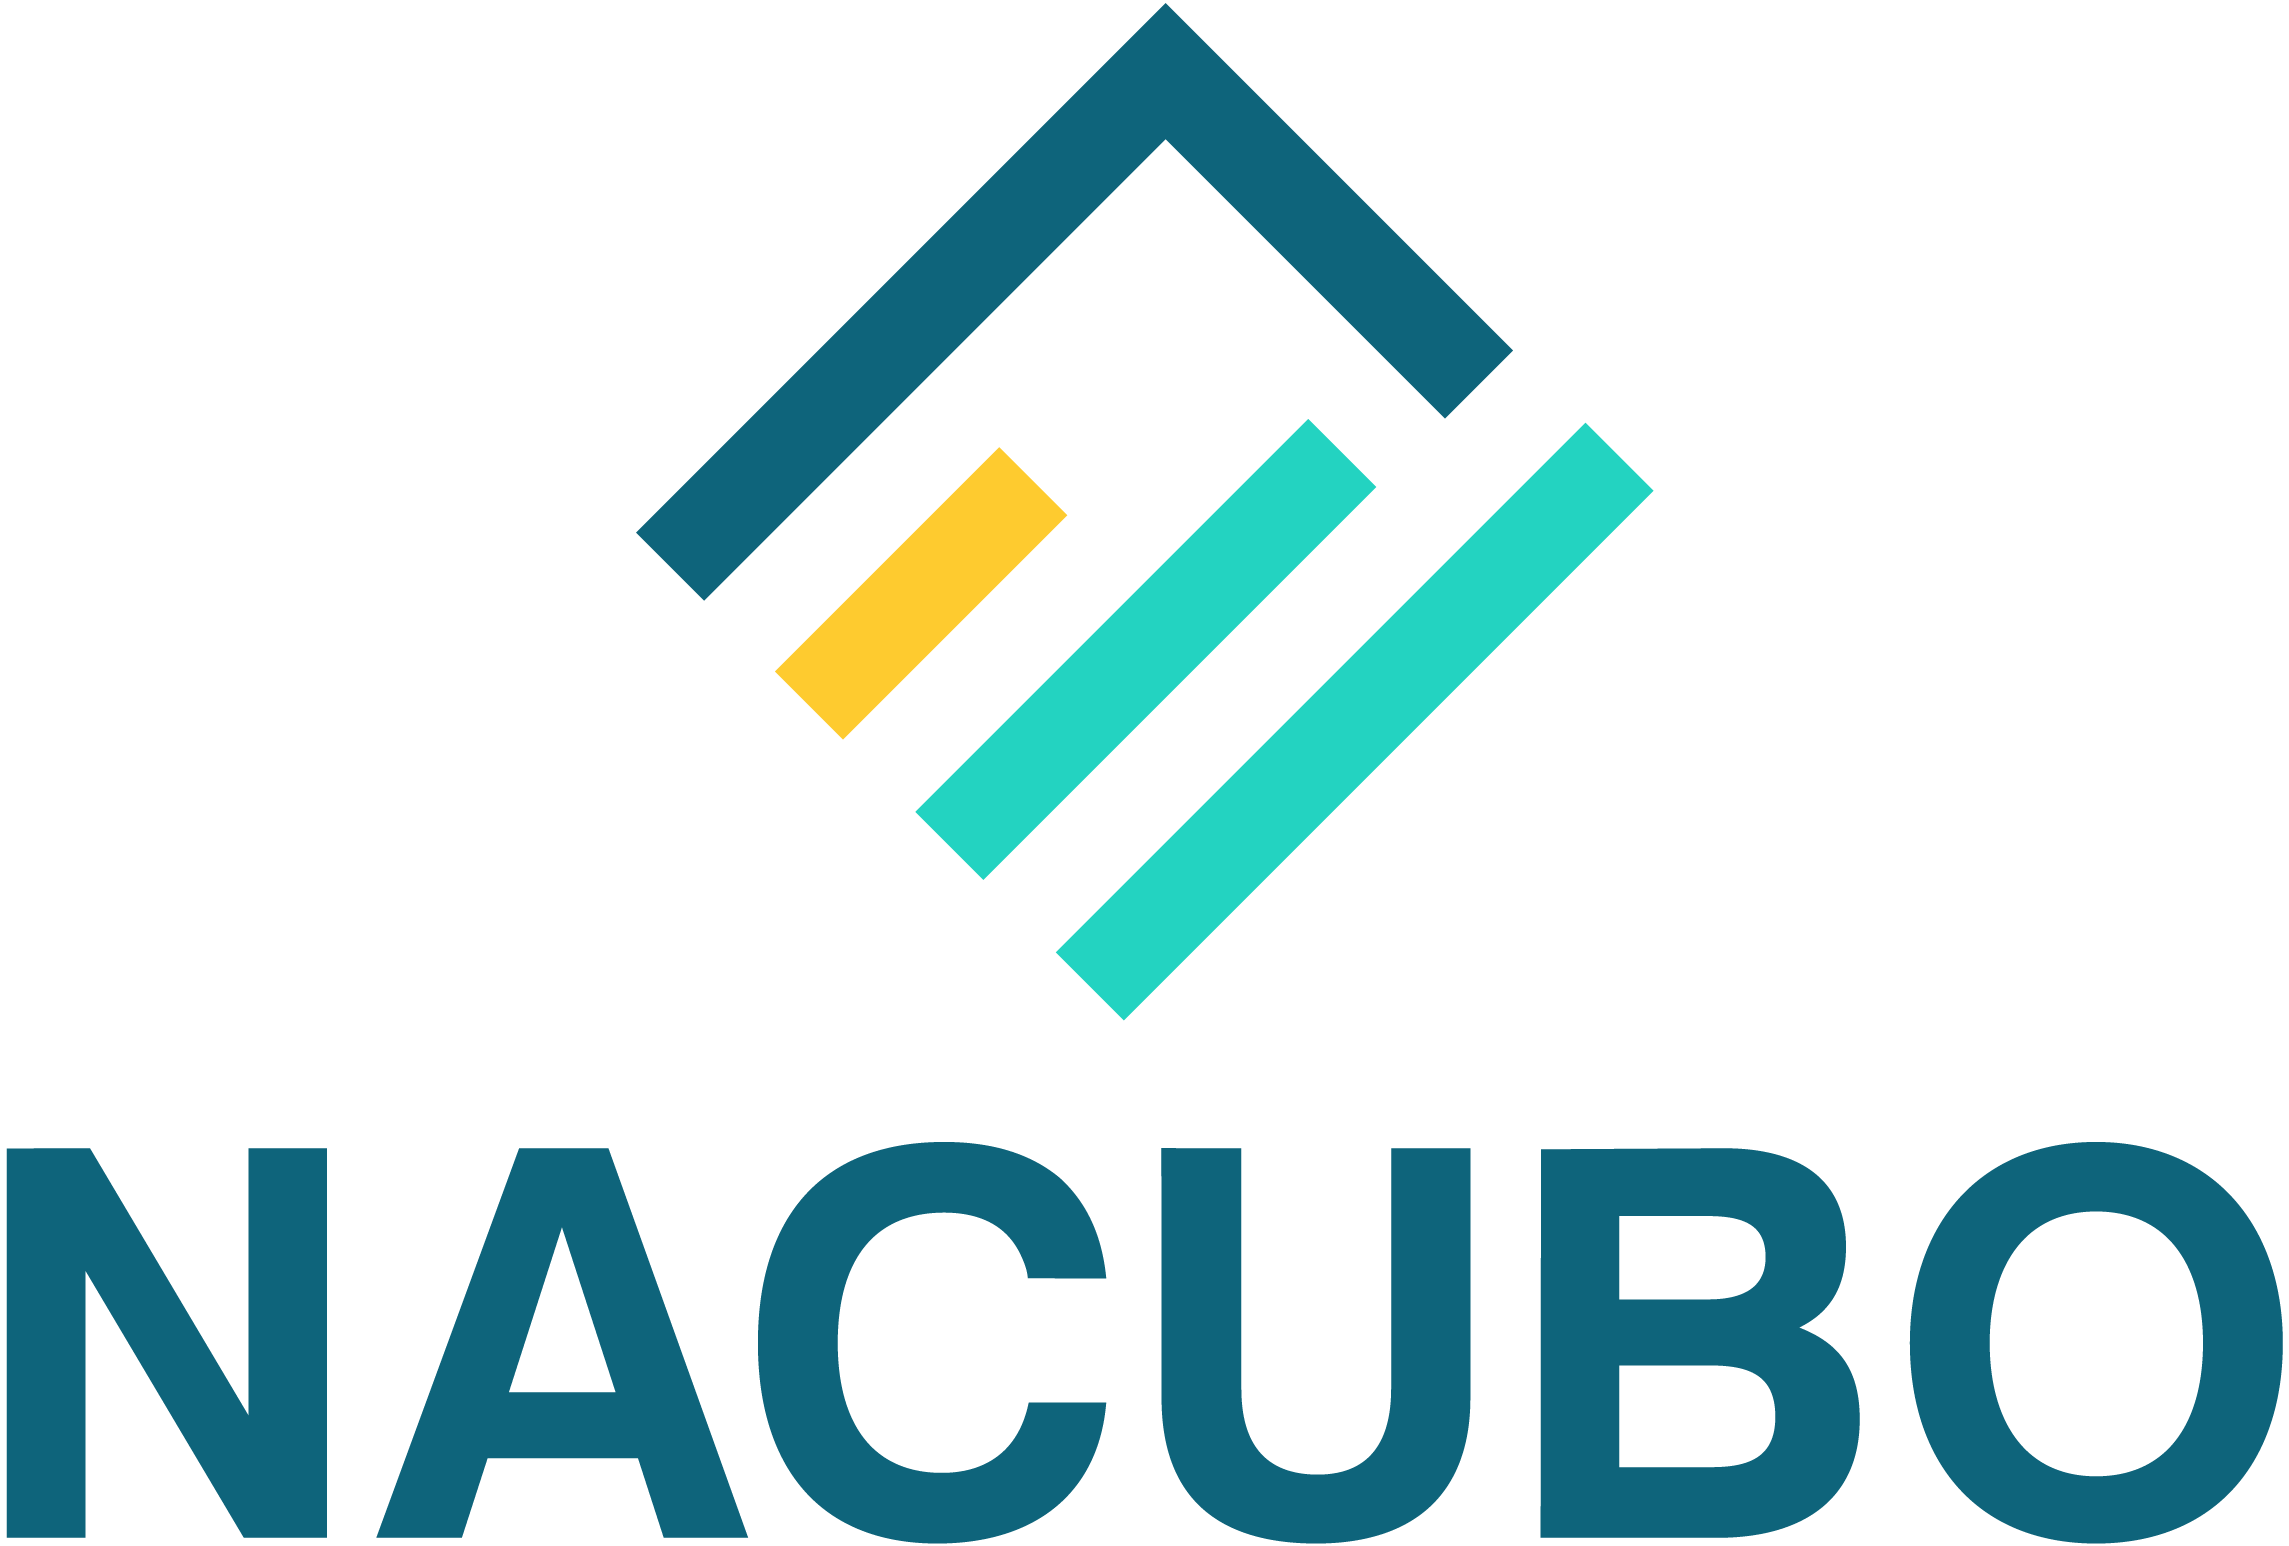 The National Association of College and University Business Officers (NACUBO) logo